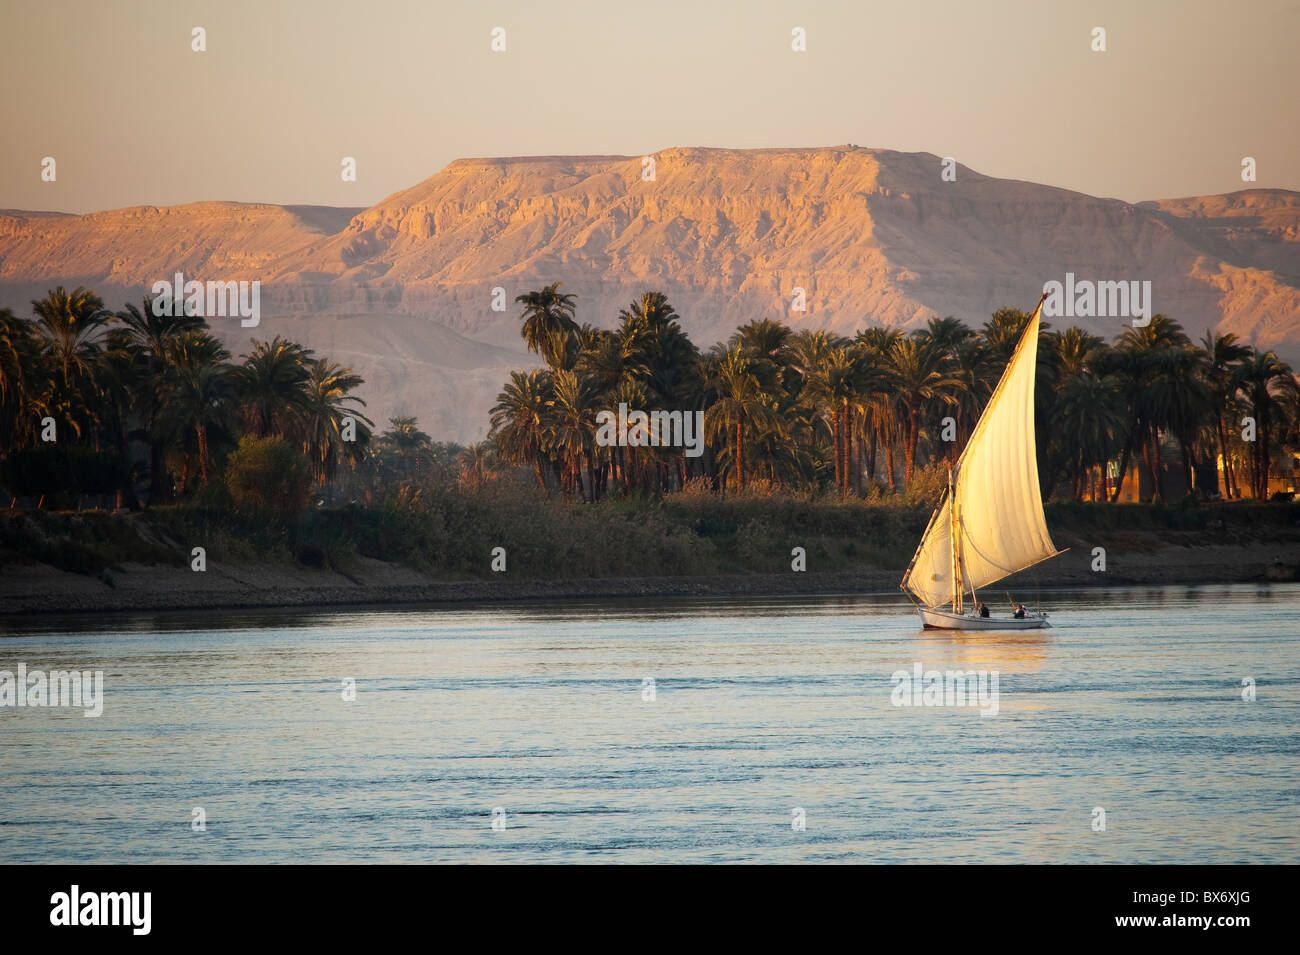 A stunning and beautiful image of a traditional Egyptian sail boat called a felucca on the Nile at sunset with mountains behind Stock Photo